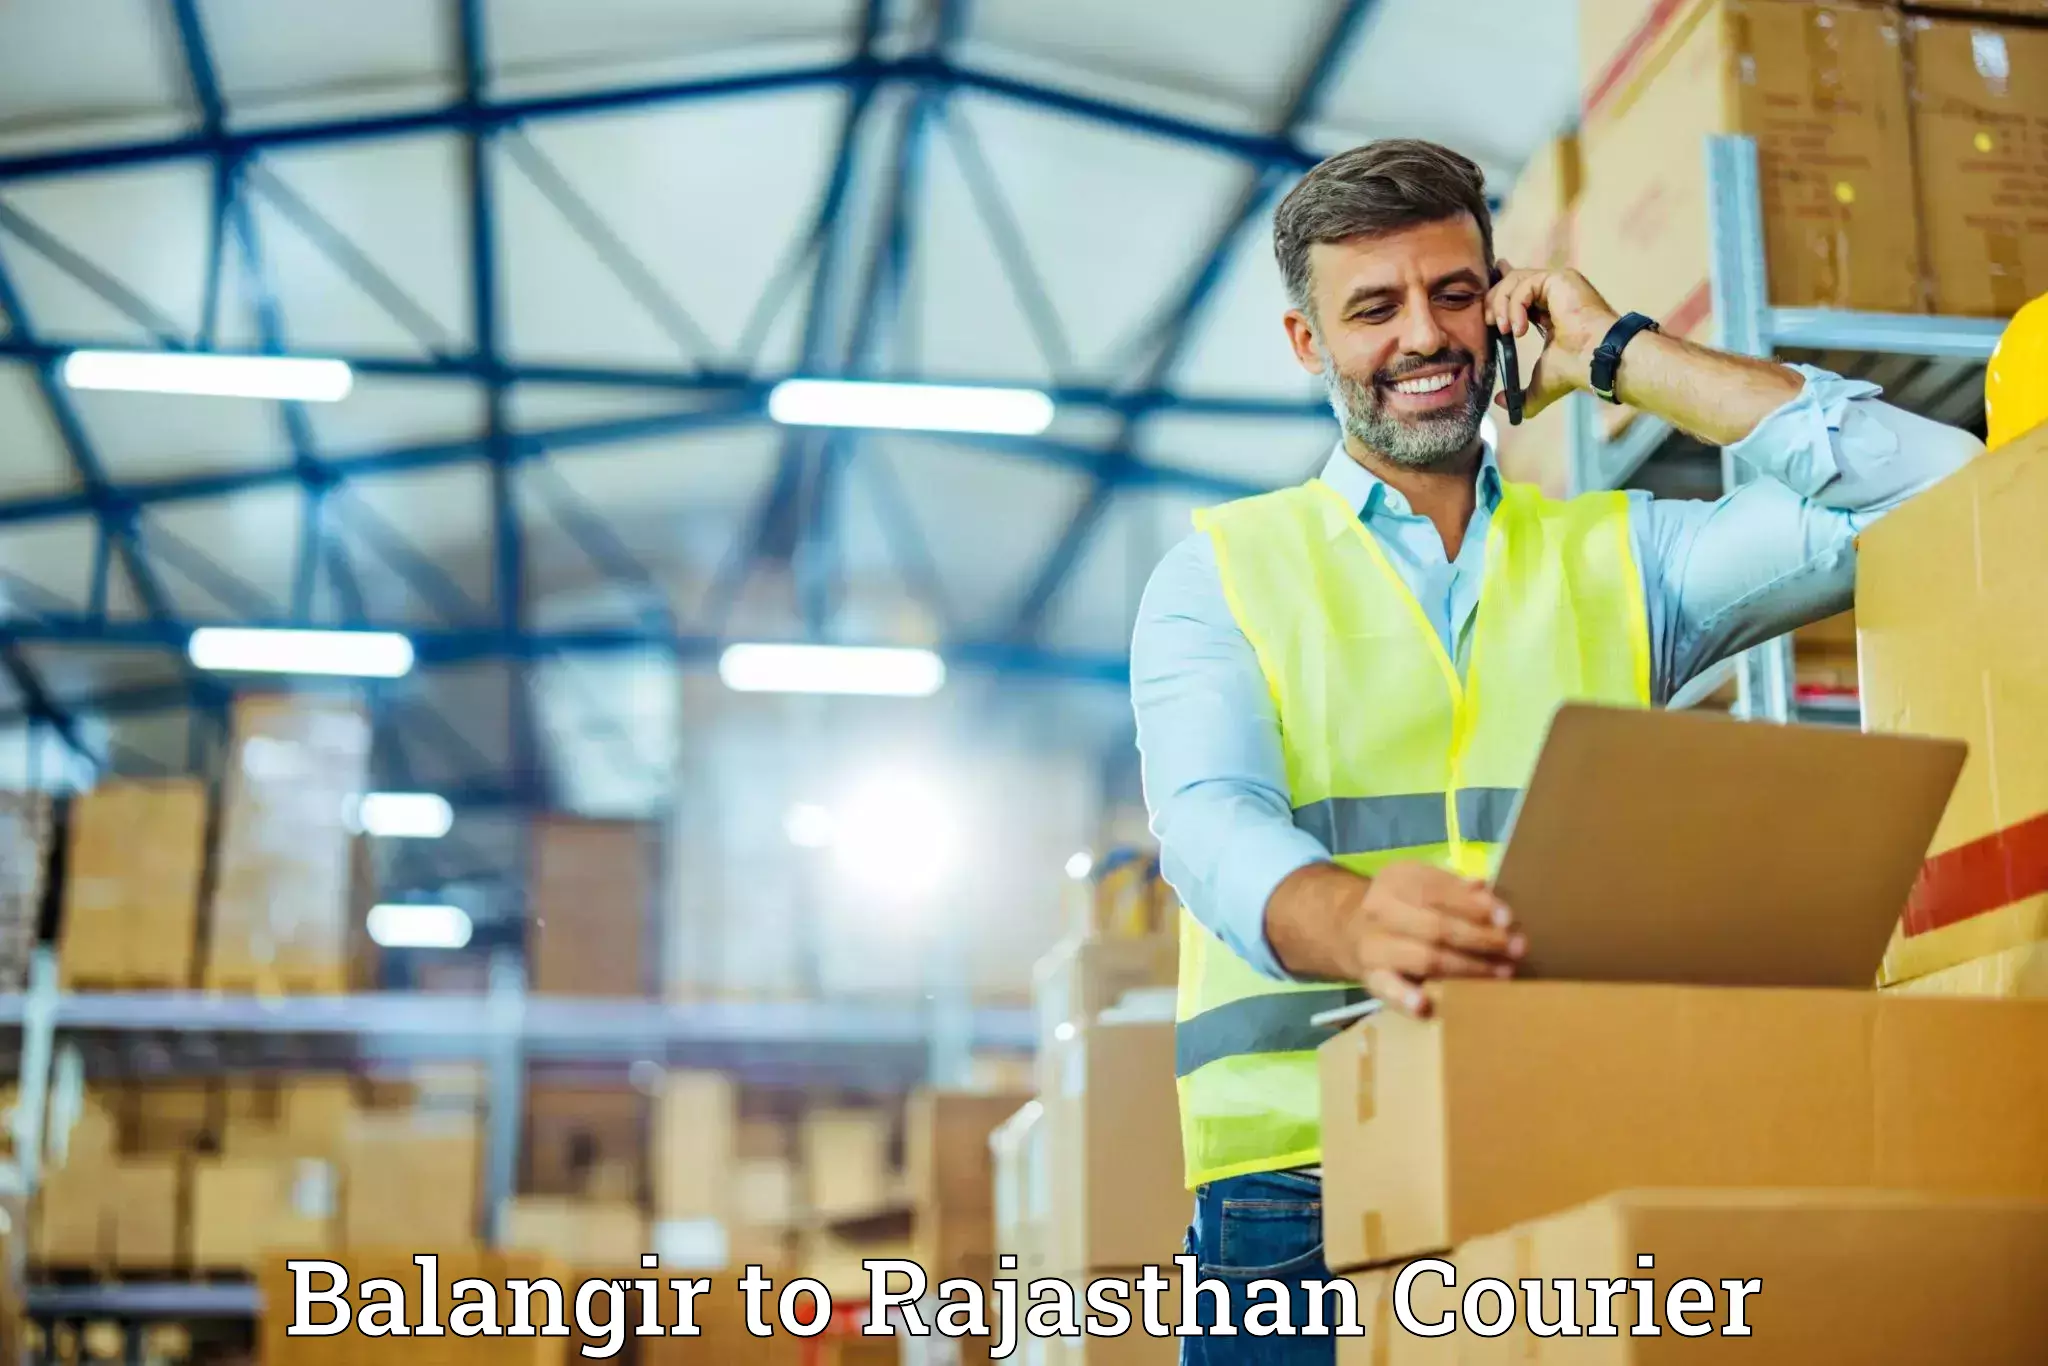 Furniture delivery service Balangir to Sojat